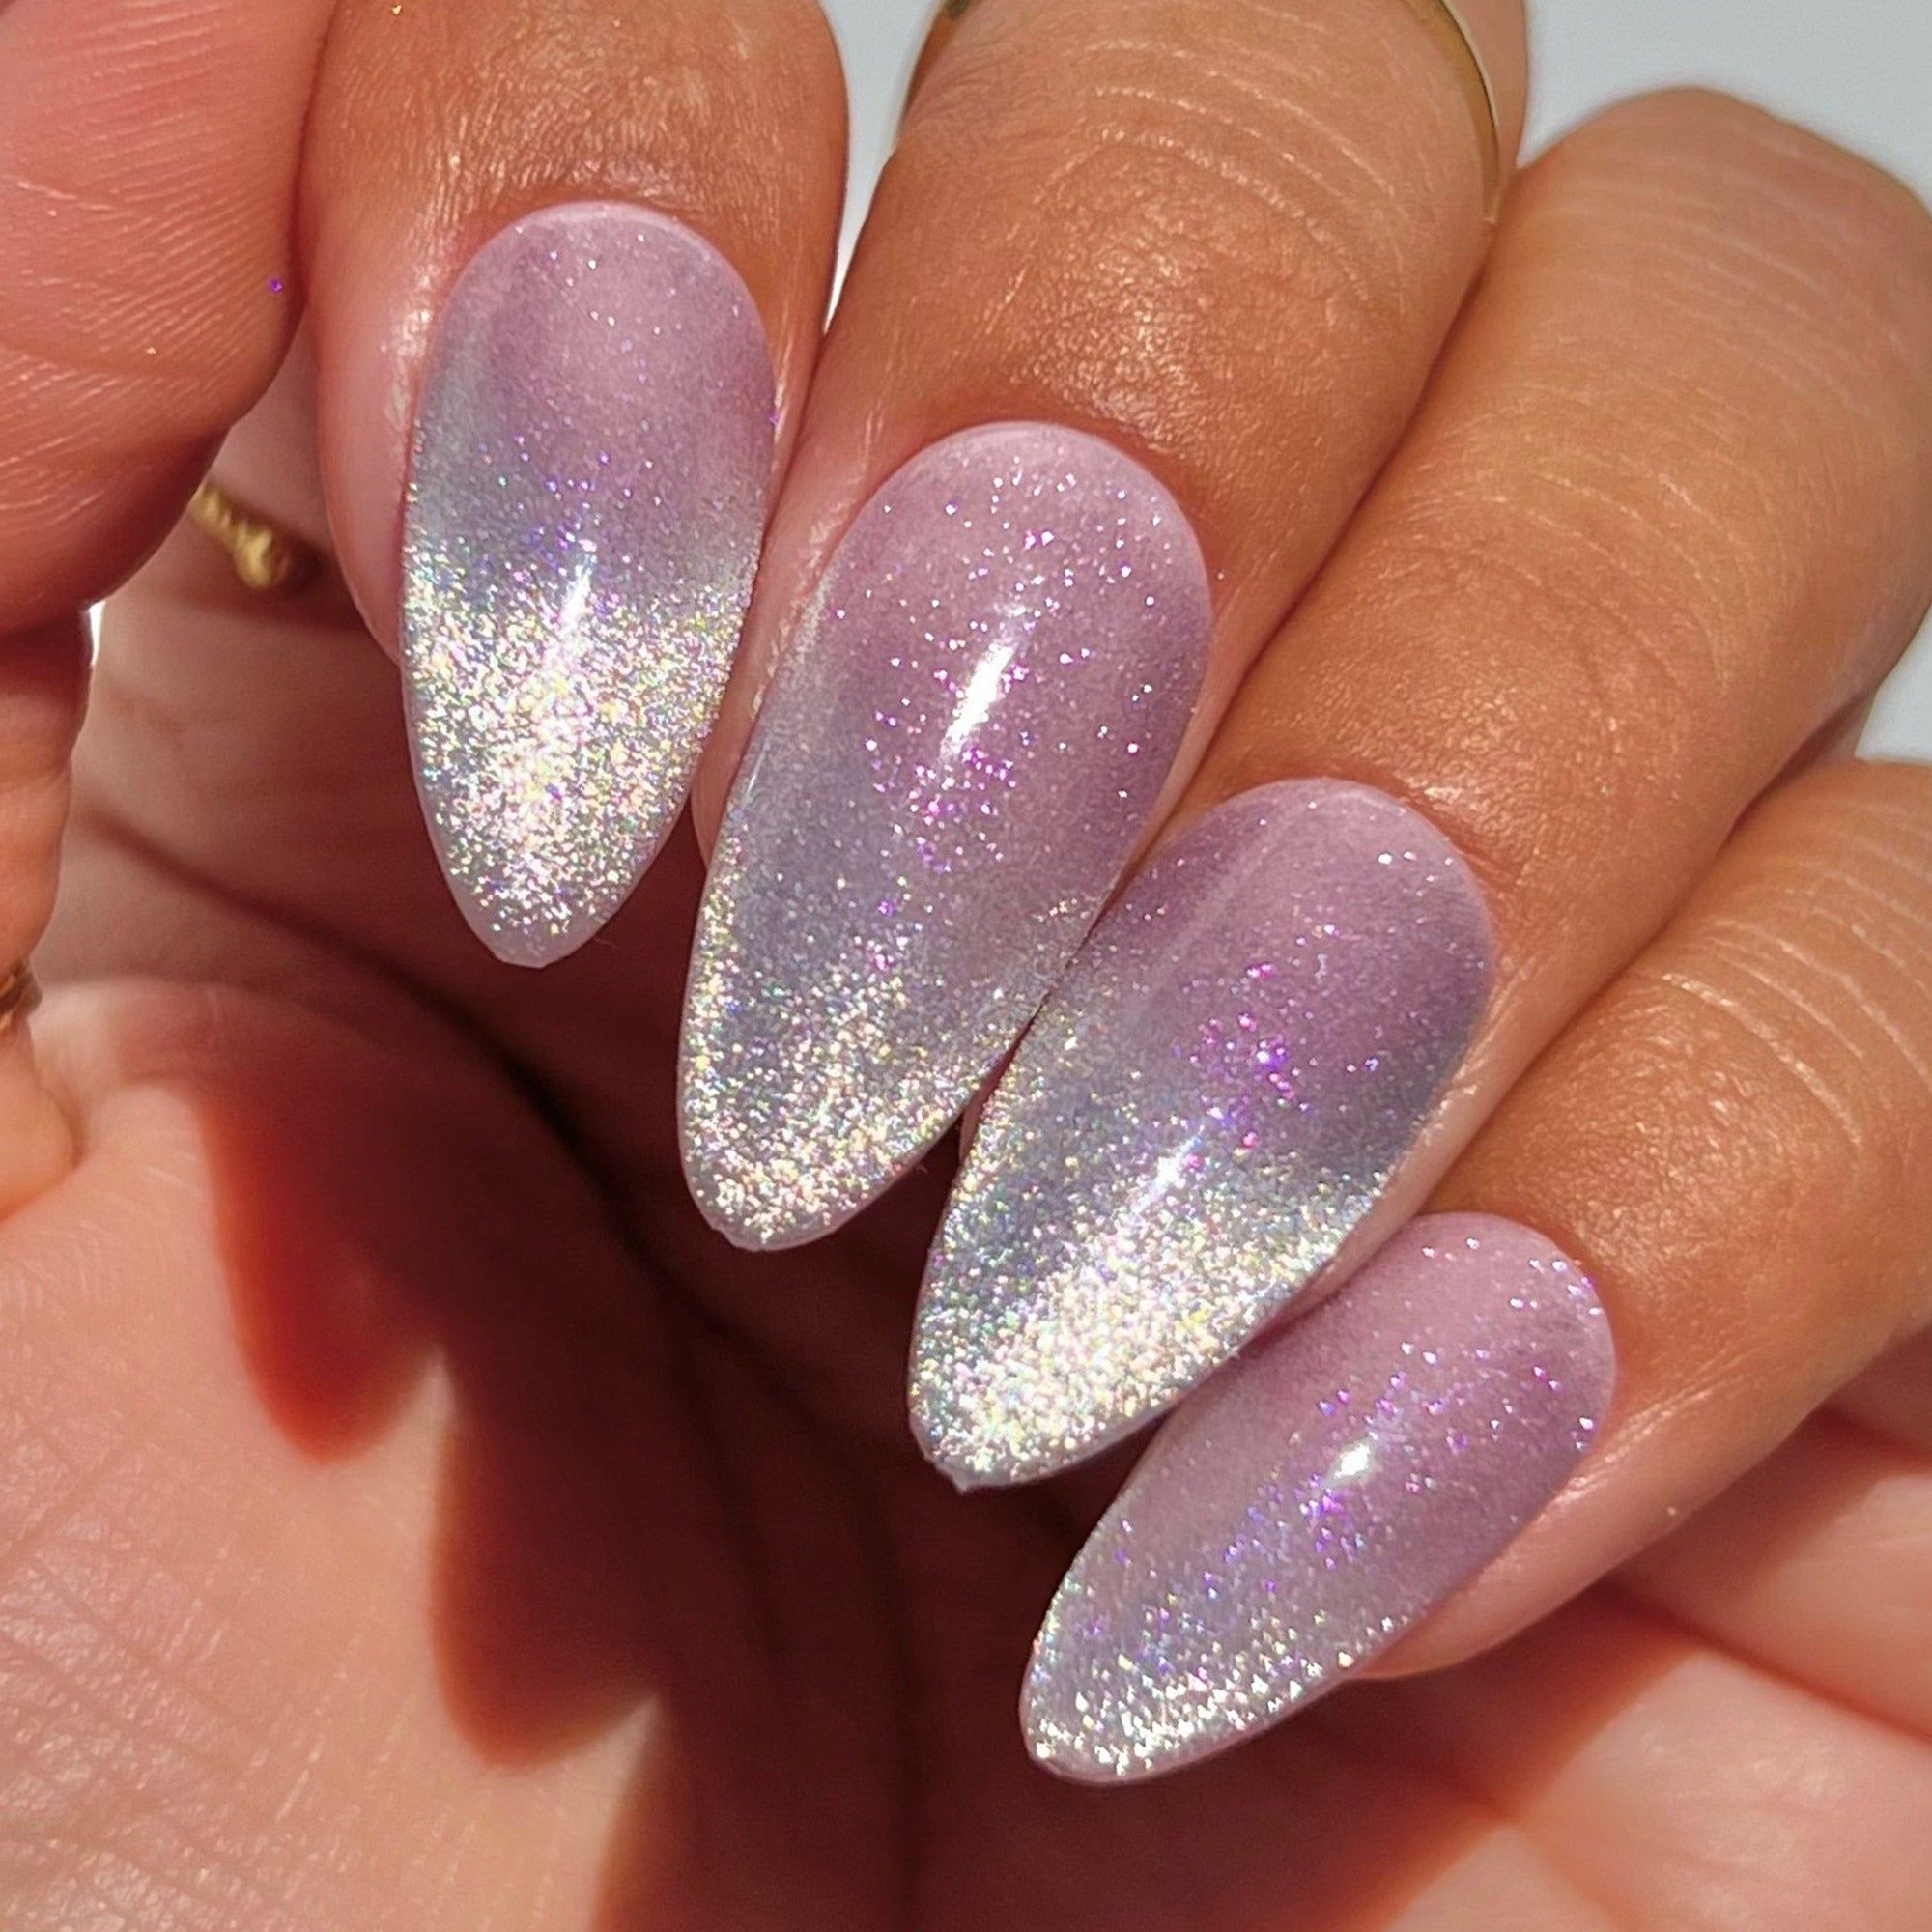 Hourglass Nails Have Gone Viral – Try These 8 Designs Now